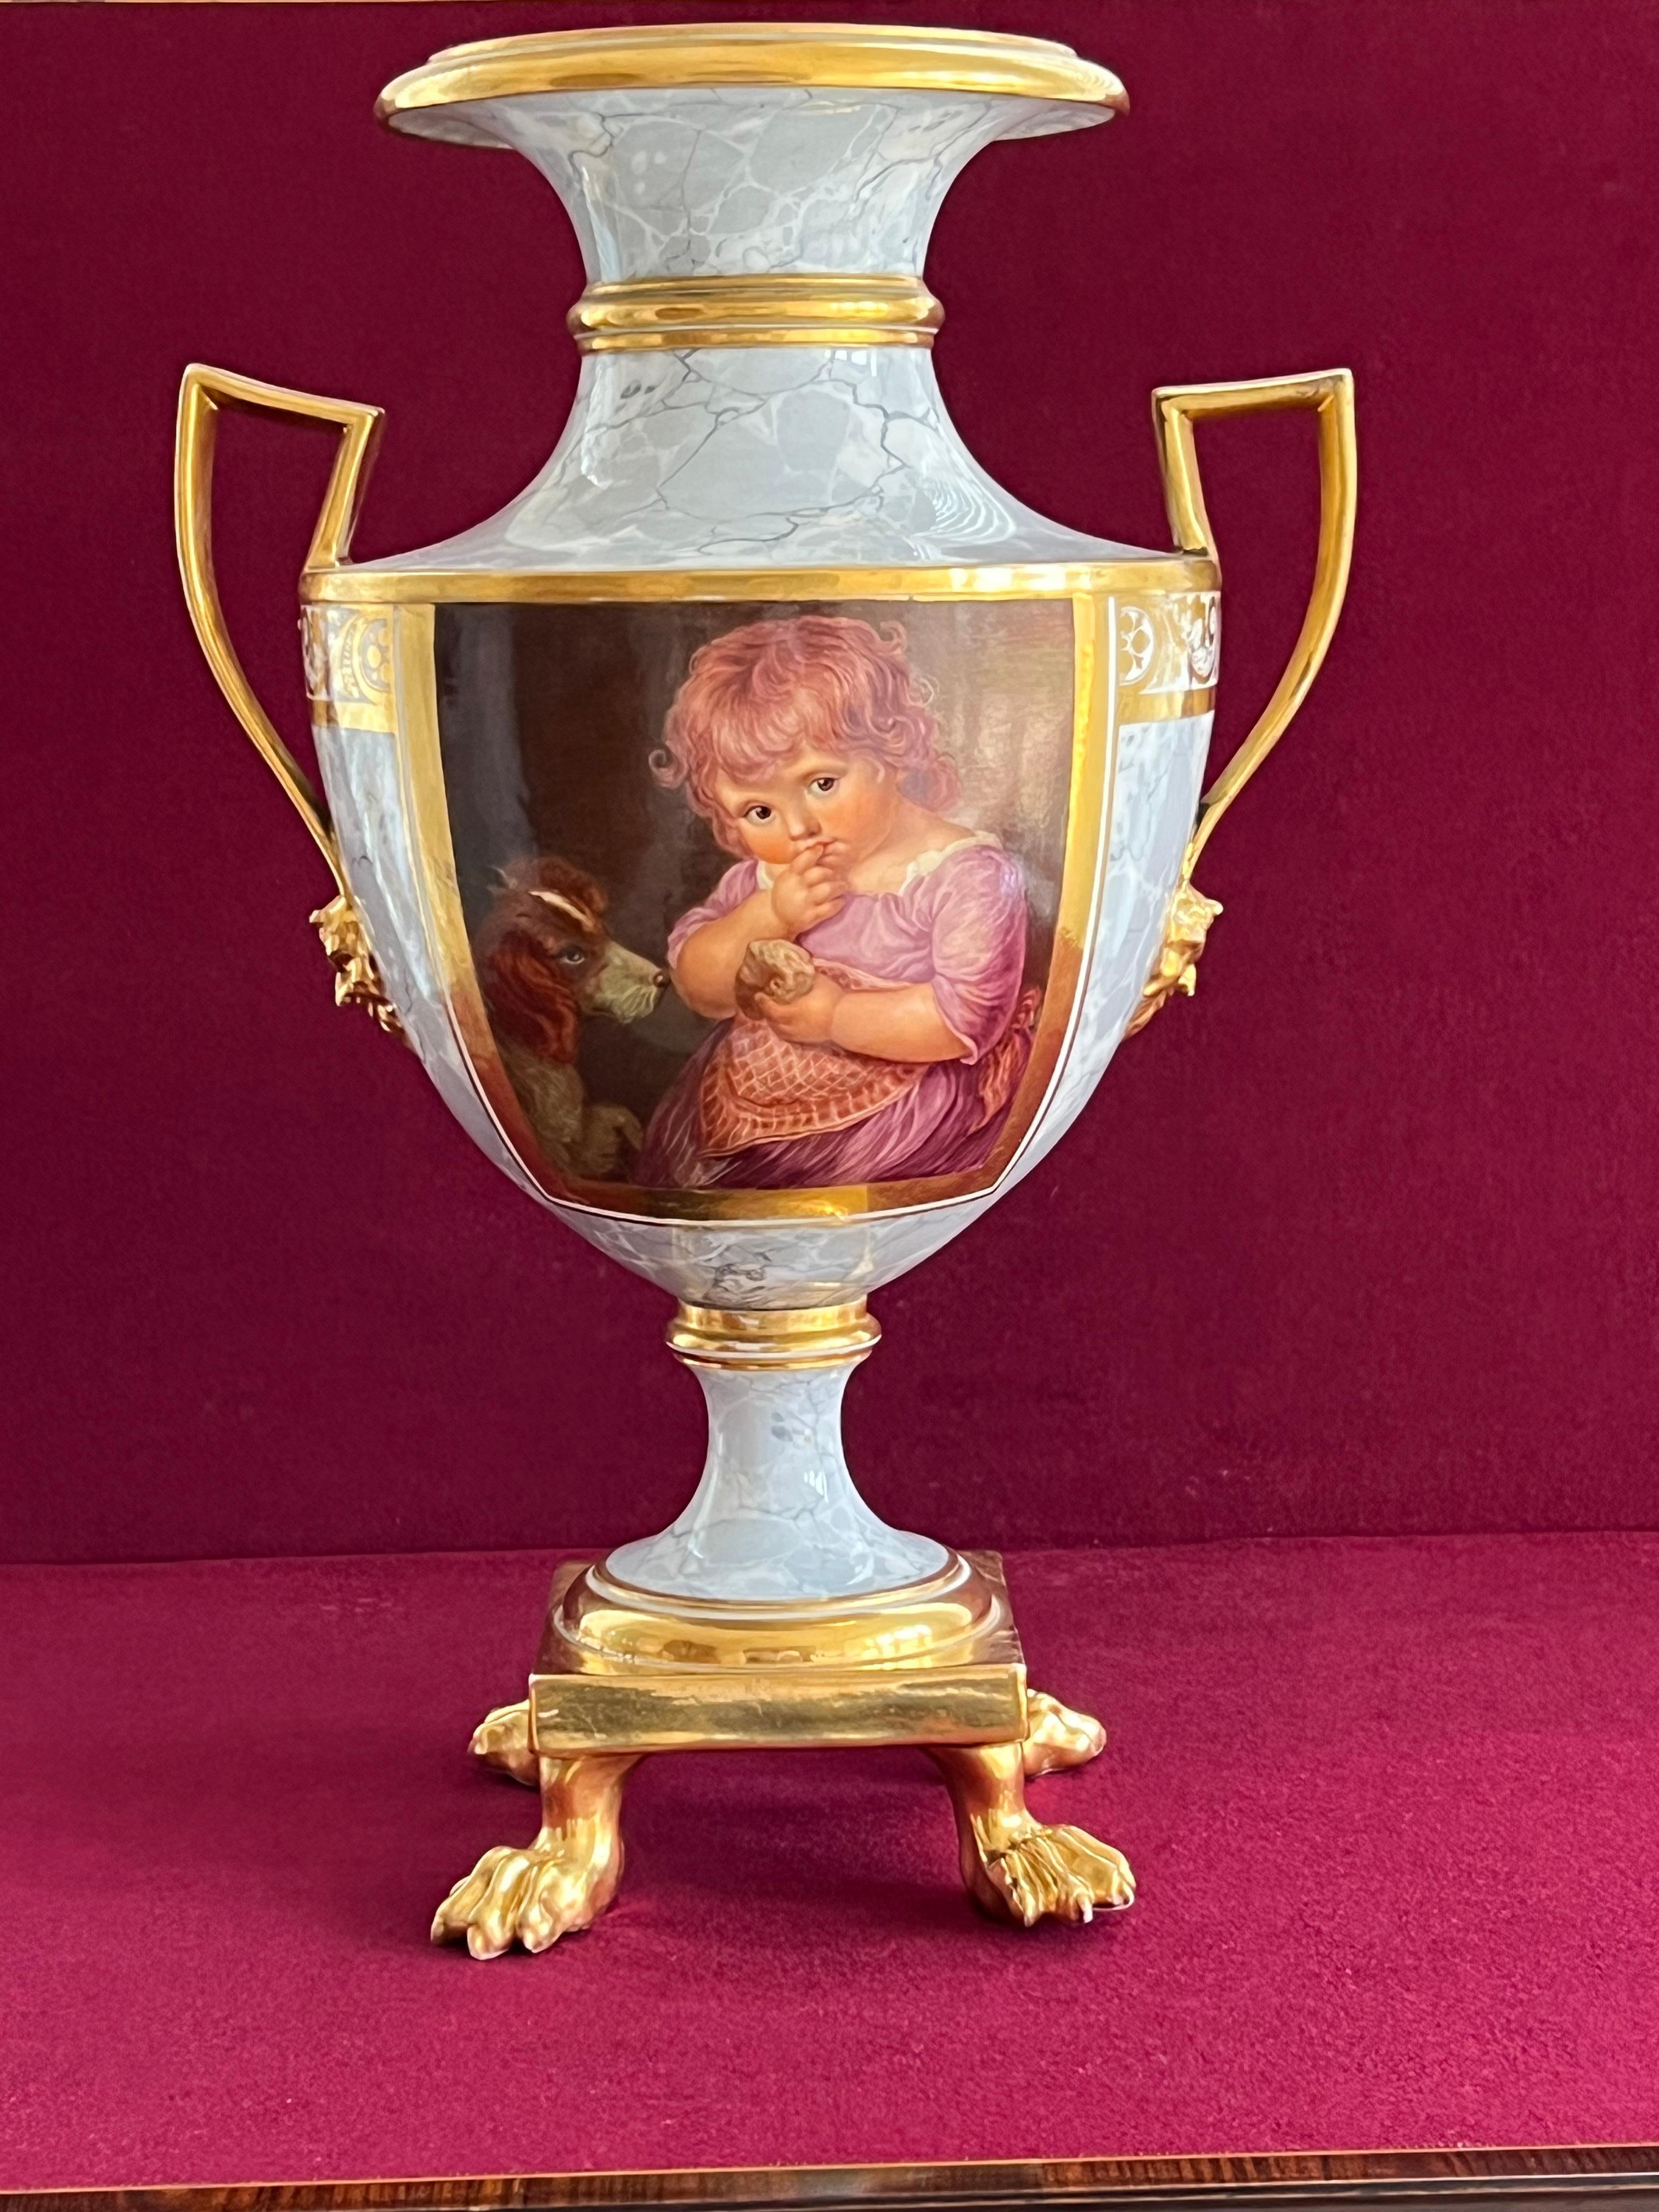 A large Etruscan-shaped barr, flight and barr worcester vase, circa 1810 Probably painted by John Pennington, of generous shield shape, the square strap handles with satyr mask terminals, raised on a square base supported on four gilded lion paw